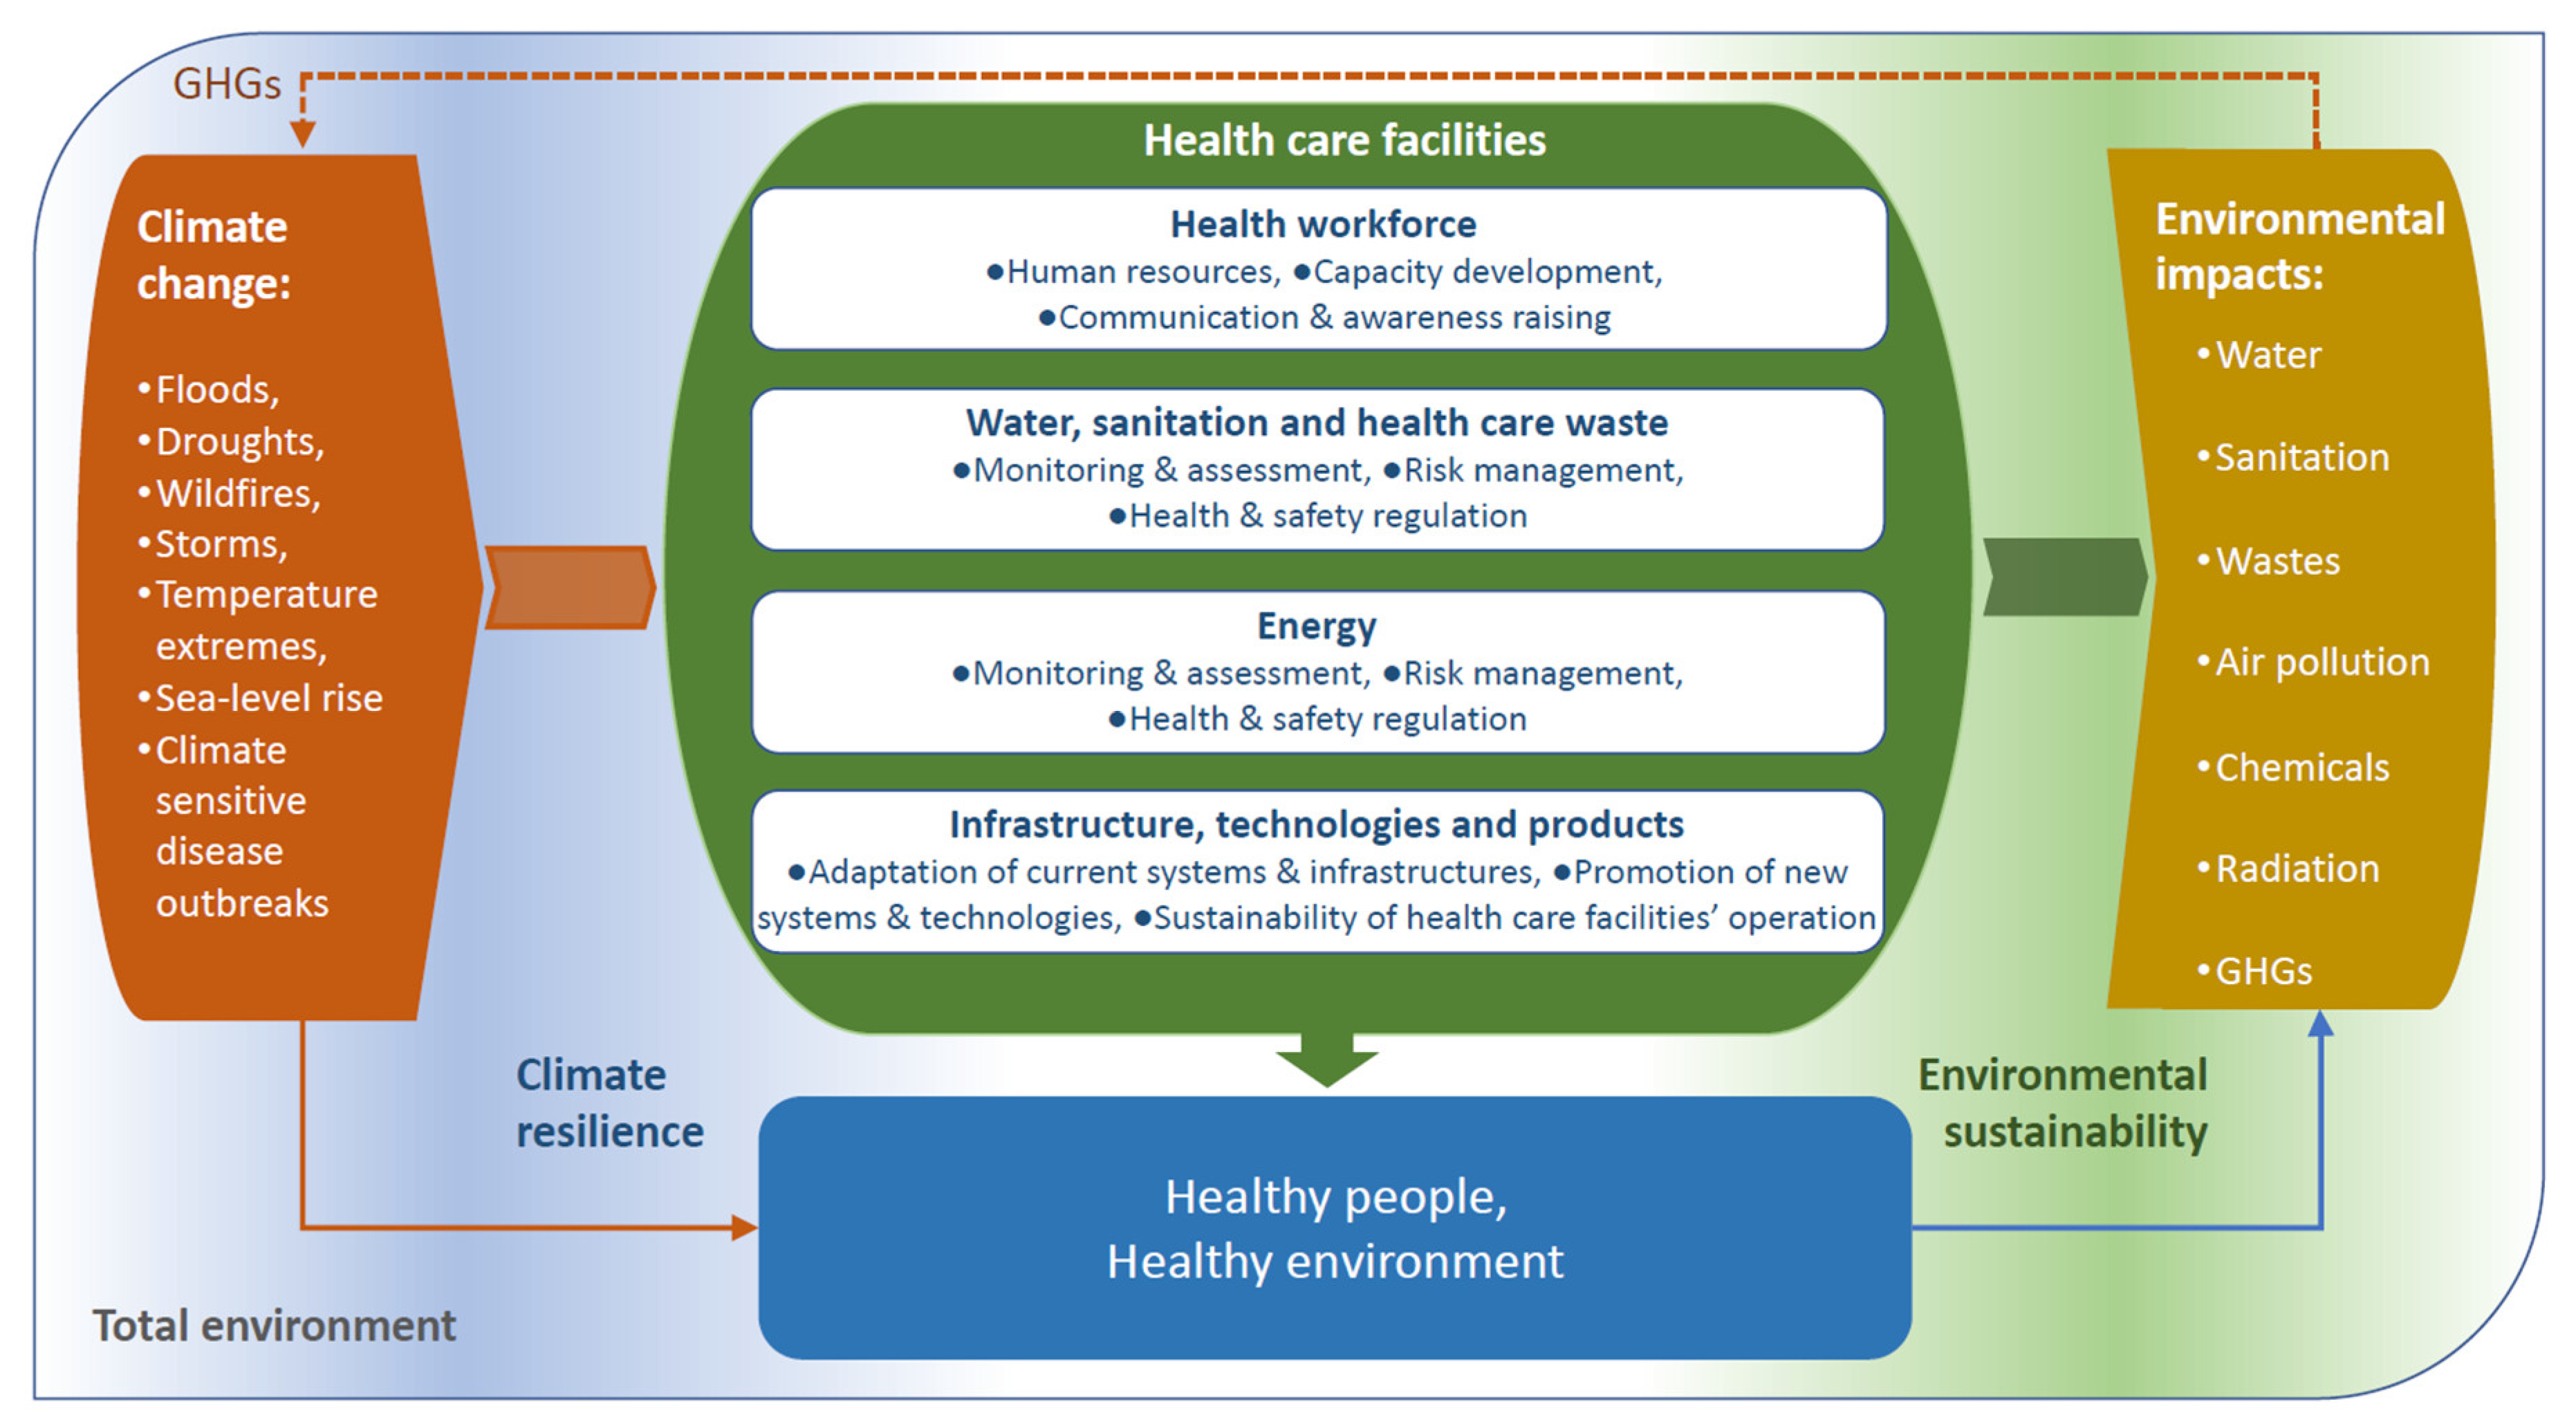 II. Benefits of Implementing Green Energy in Hospitals and Clinics